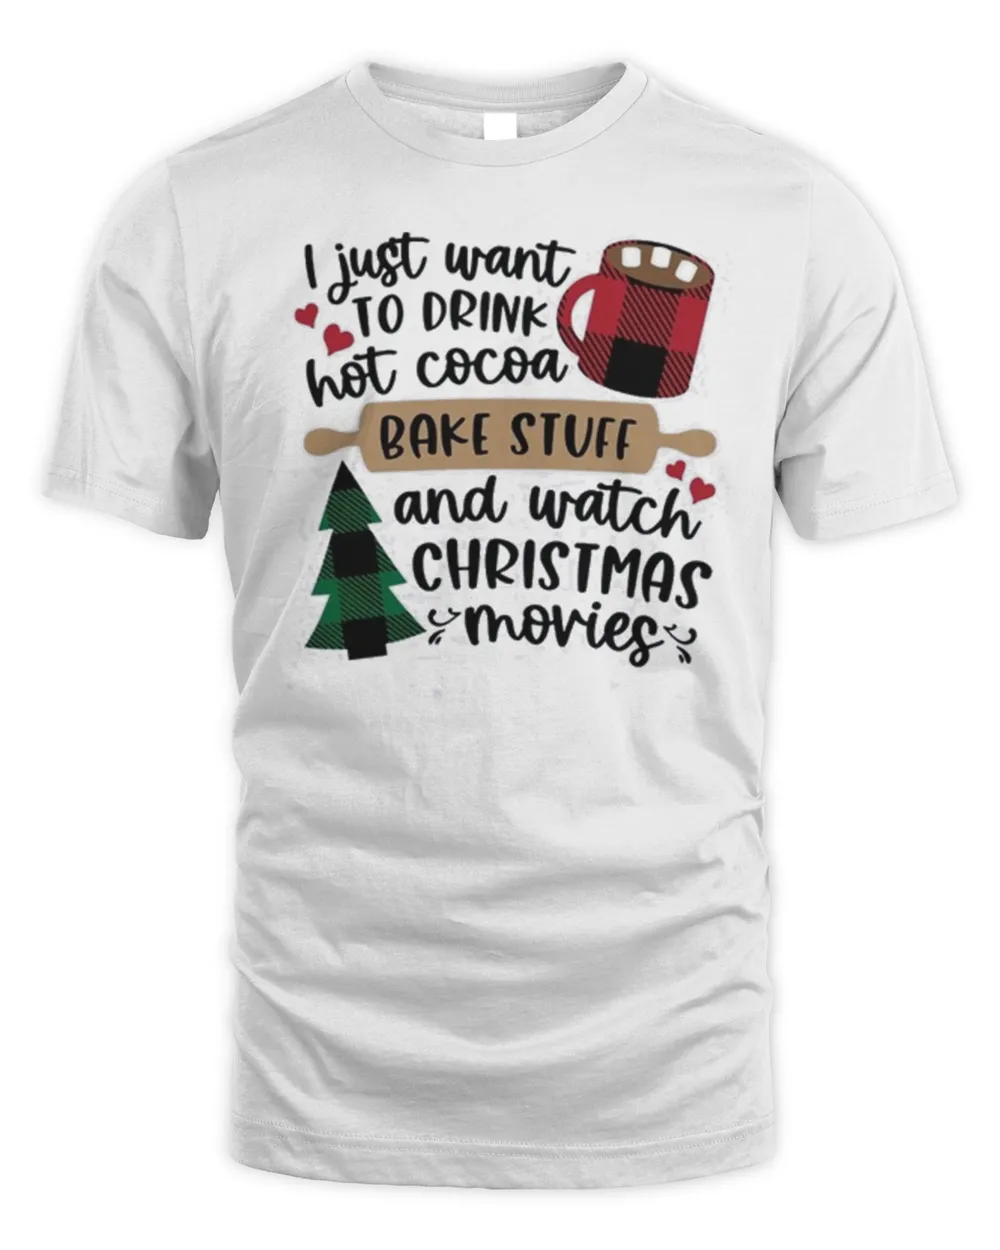 I Just Want to Drink Hot Cocoa Bake Stuff and Watch Christmas Movies Merry Christmas Shirt